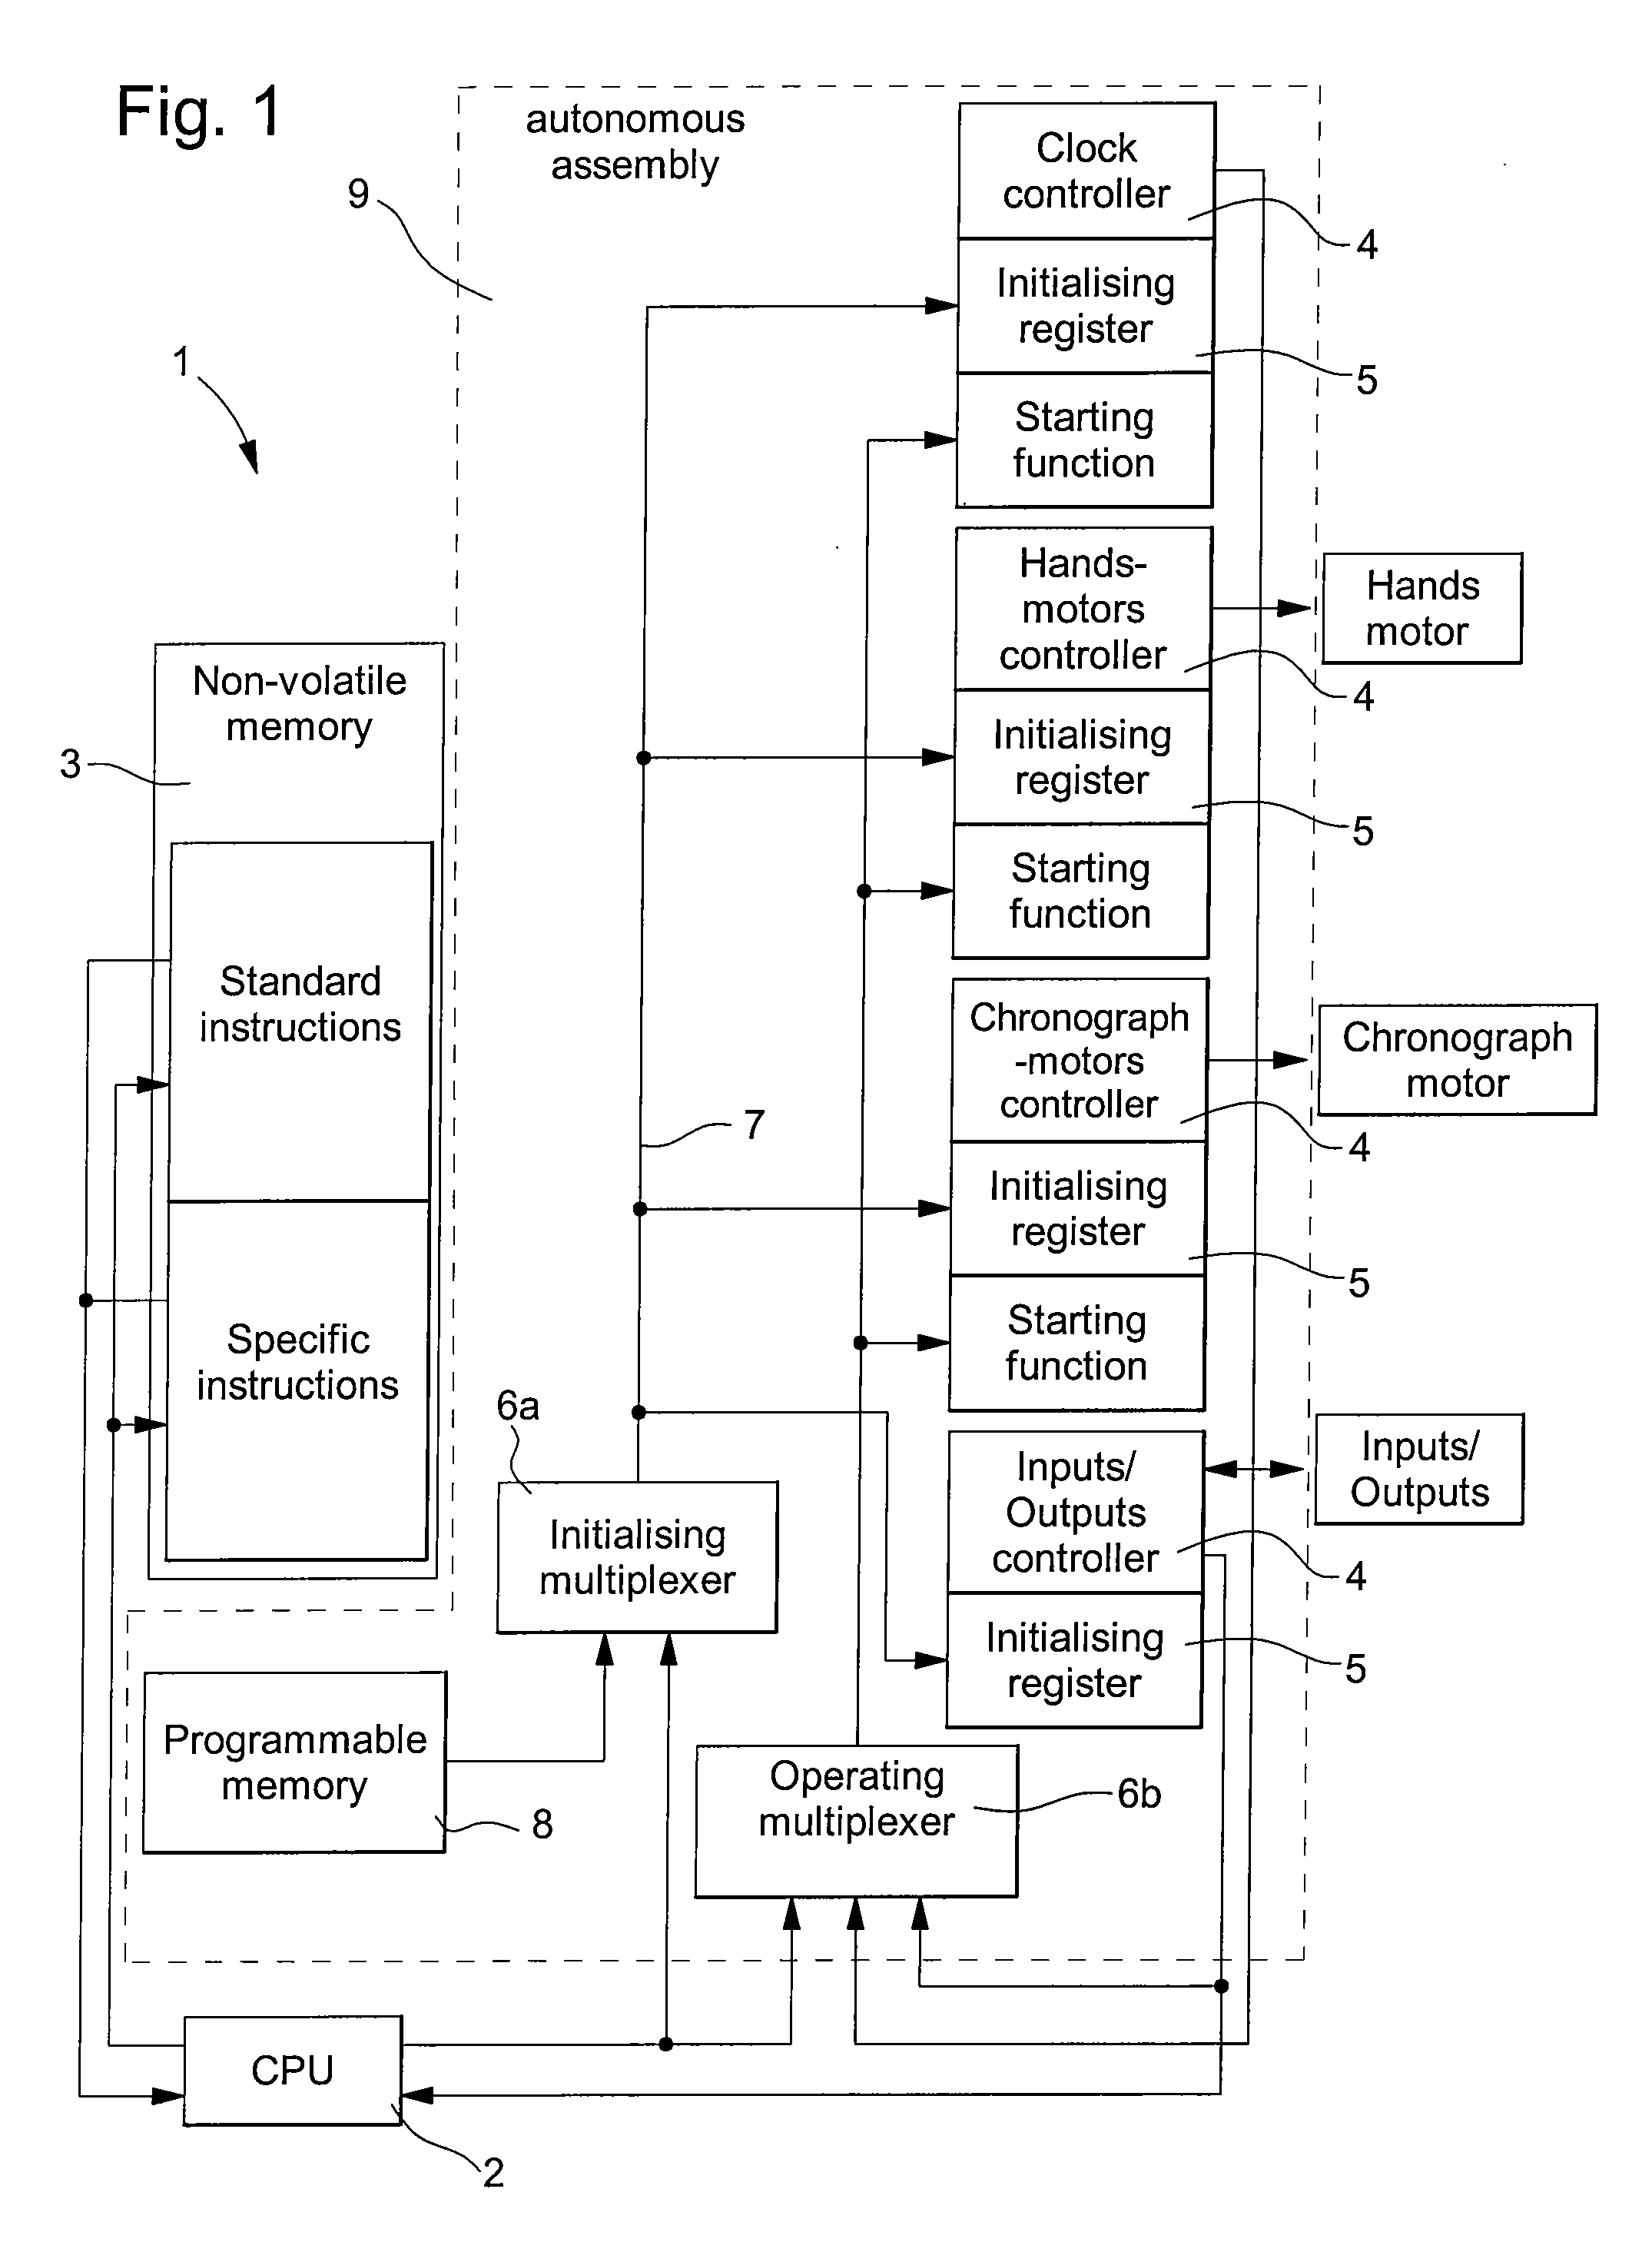 Electronic circuit controlling the operation of peripheral members of the watch